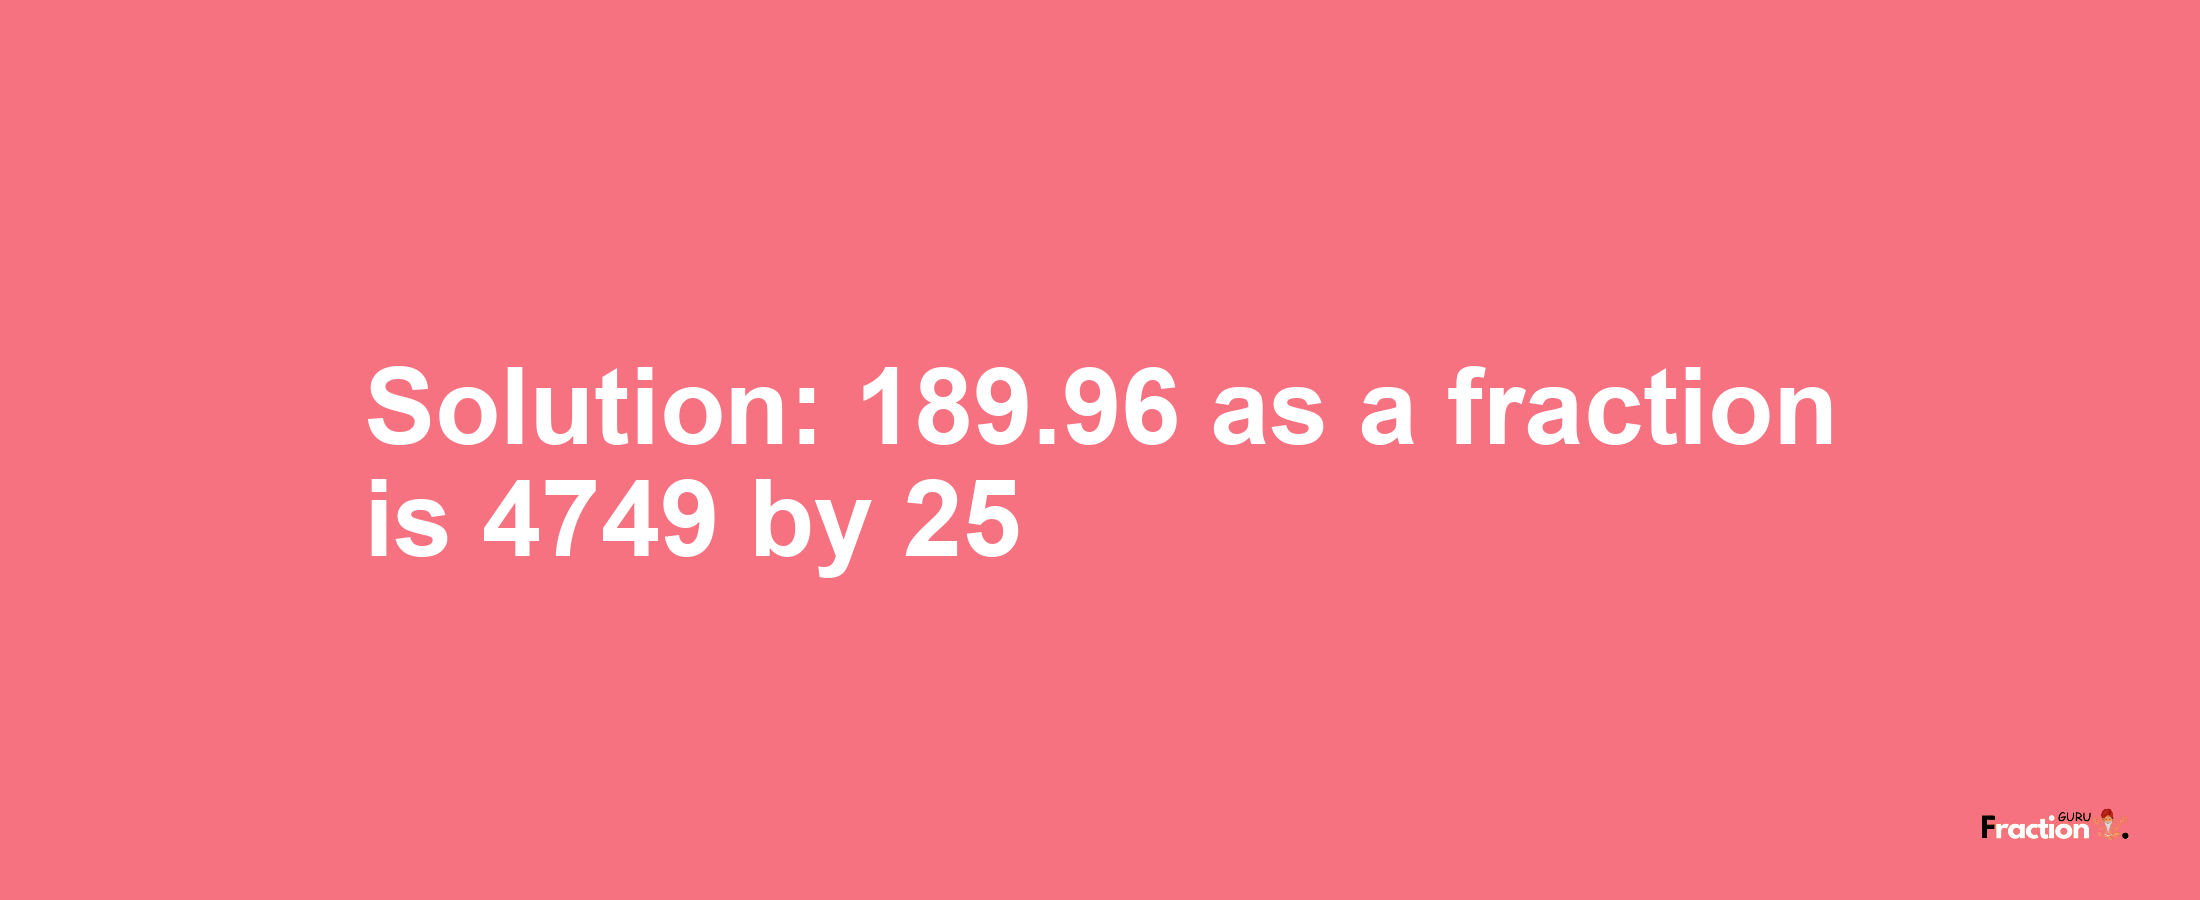 Solution:189.96 as a fraction is 4749/25